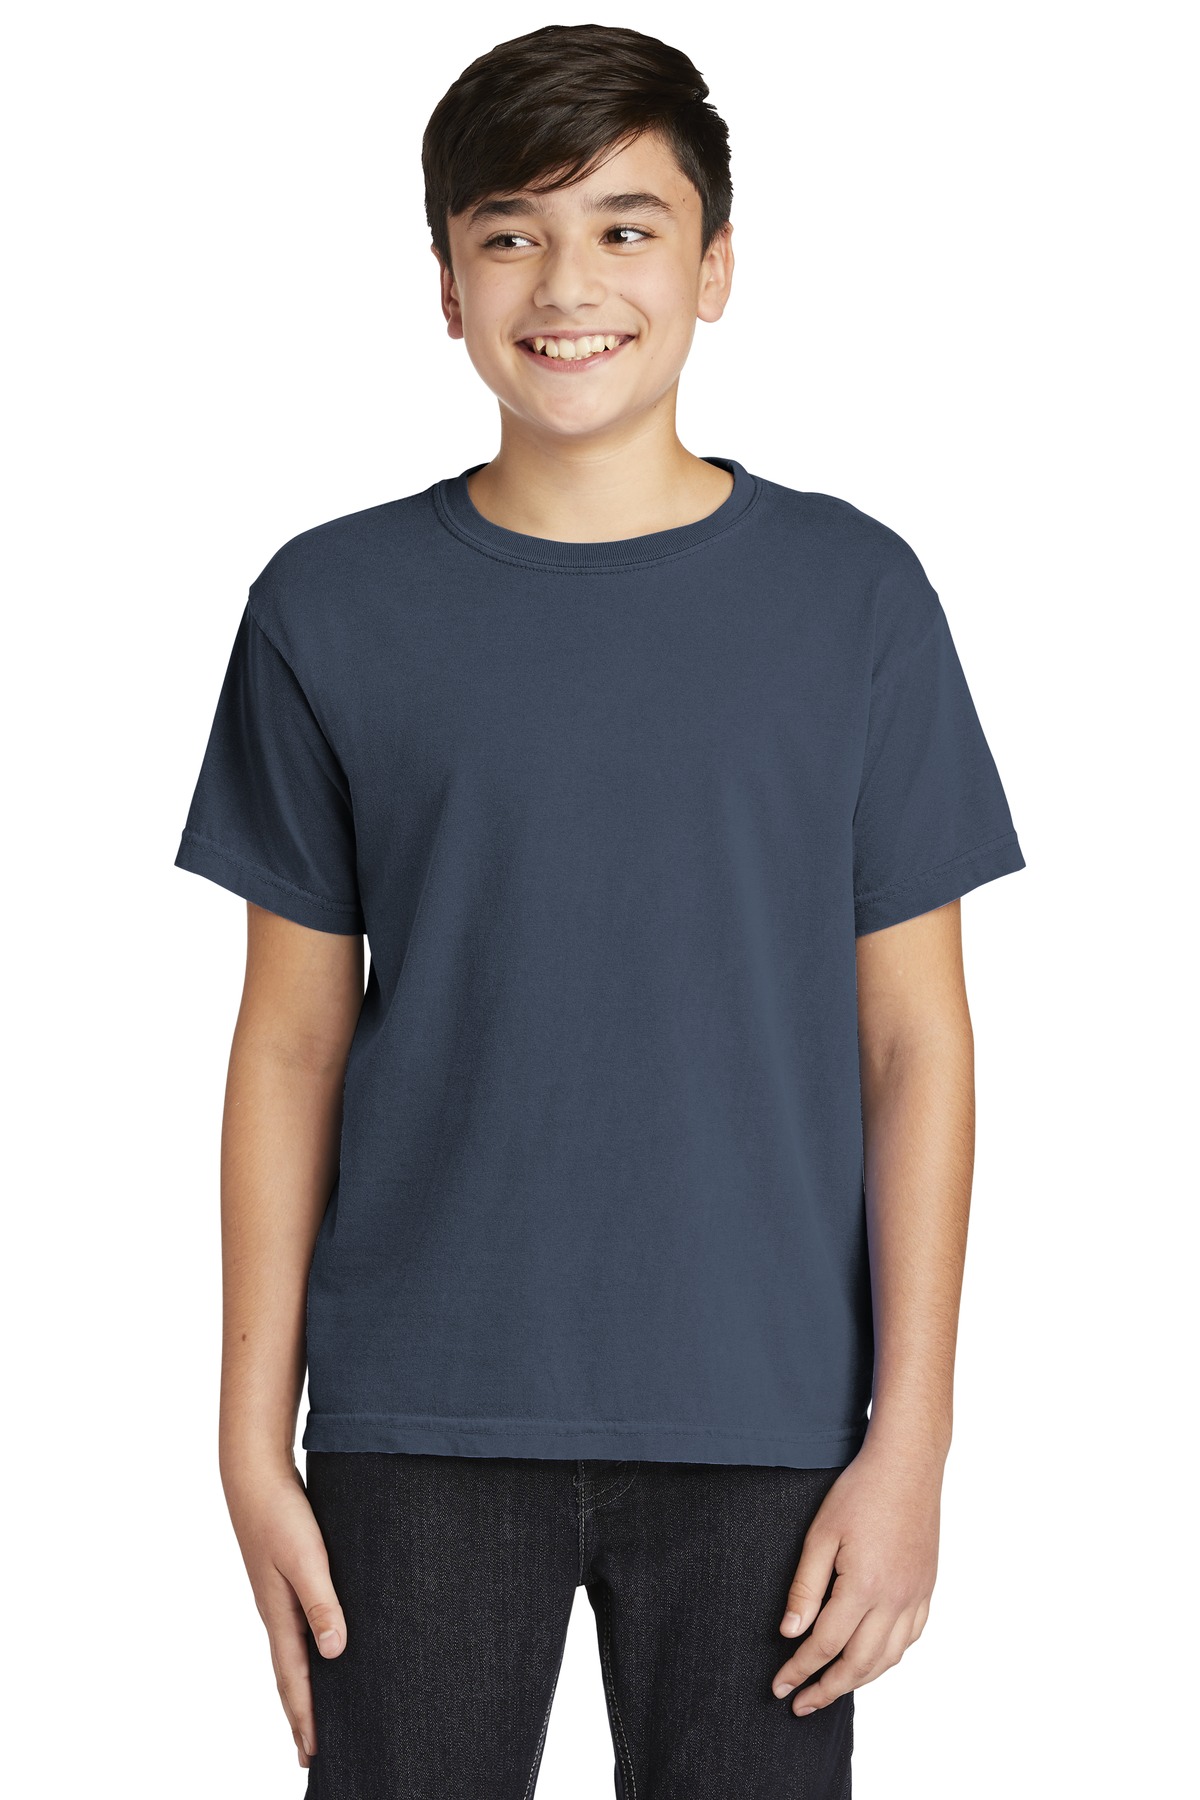 COMFORT COLORS Youth Midweight Ring Spun Tee. 9018